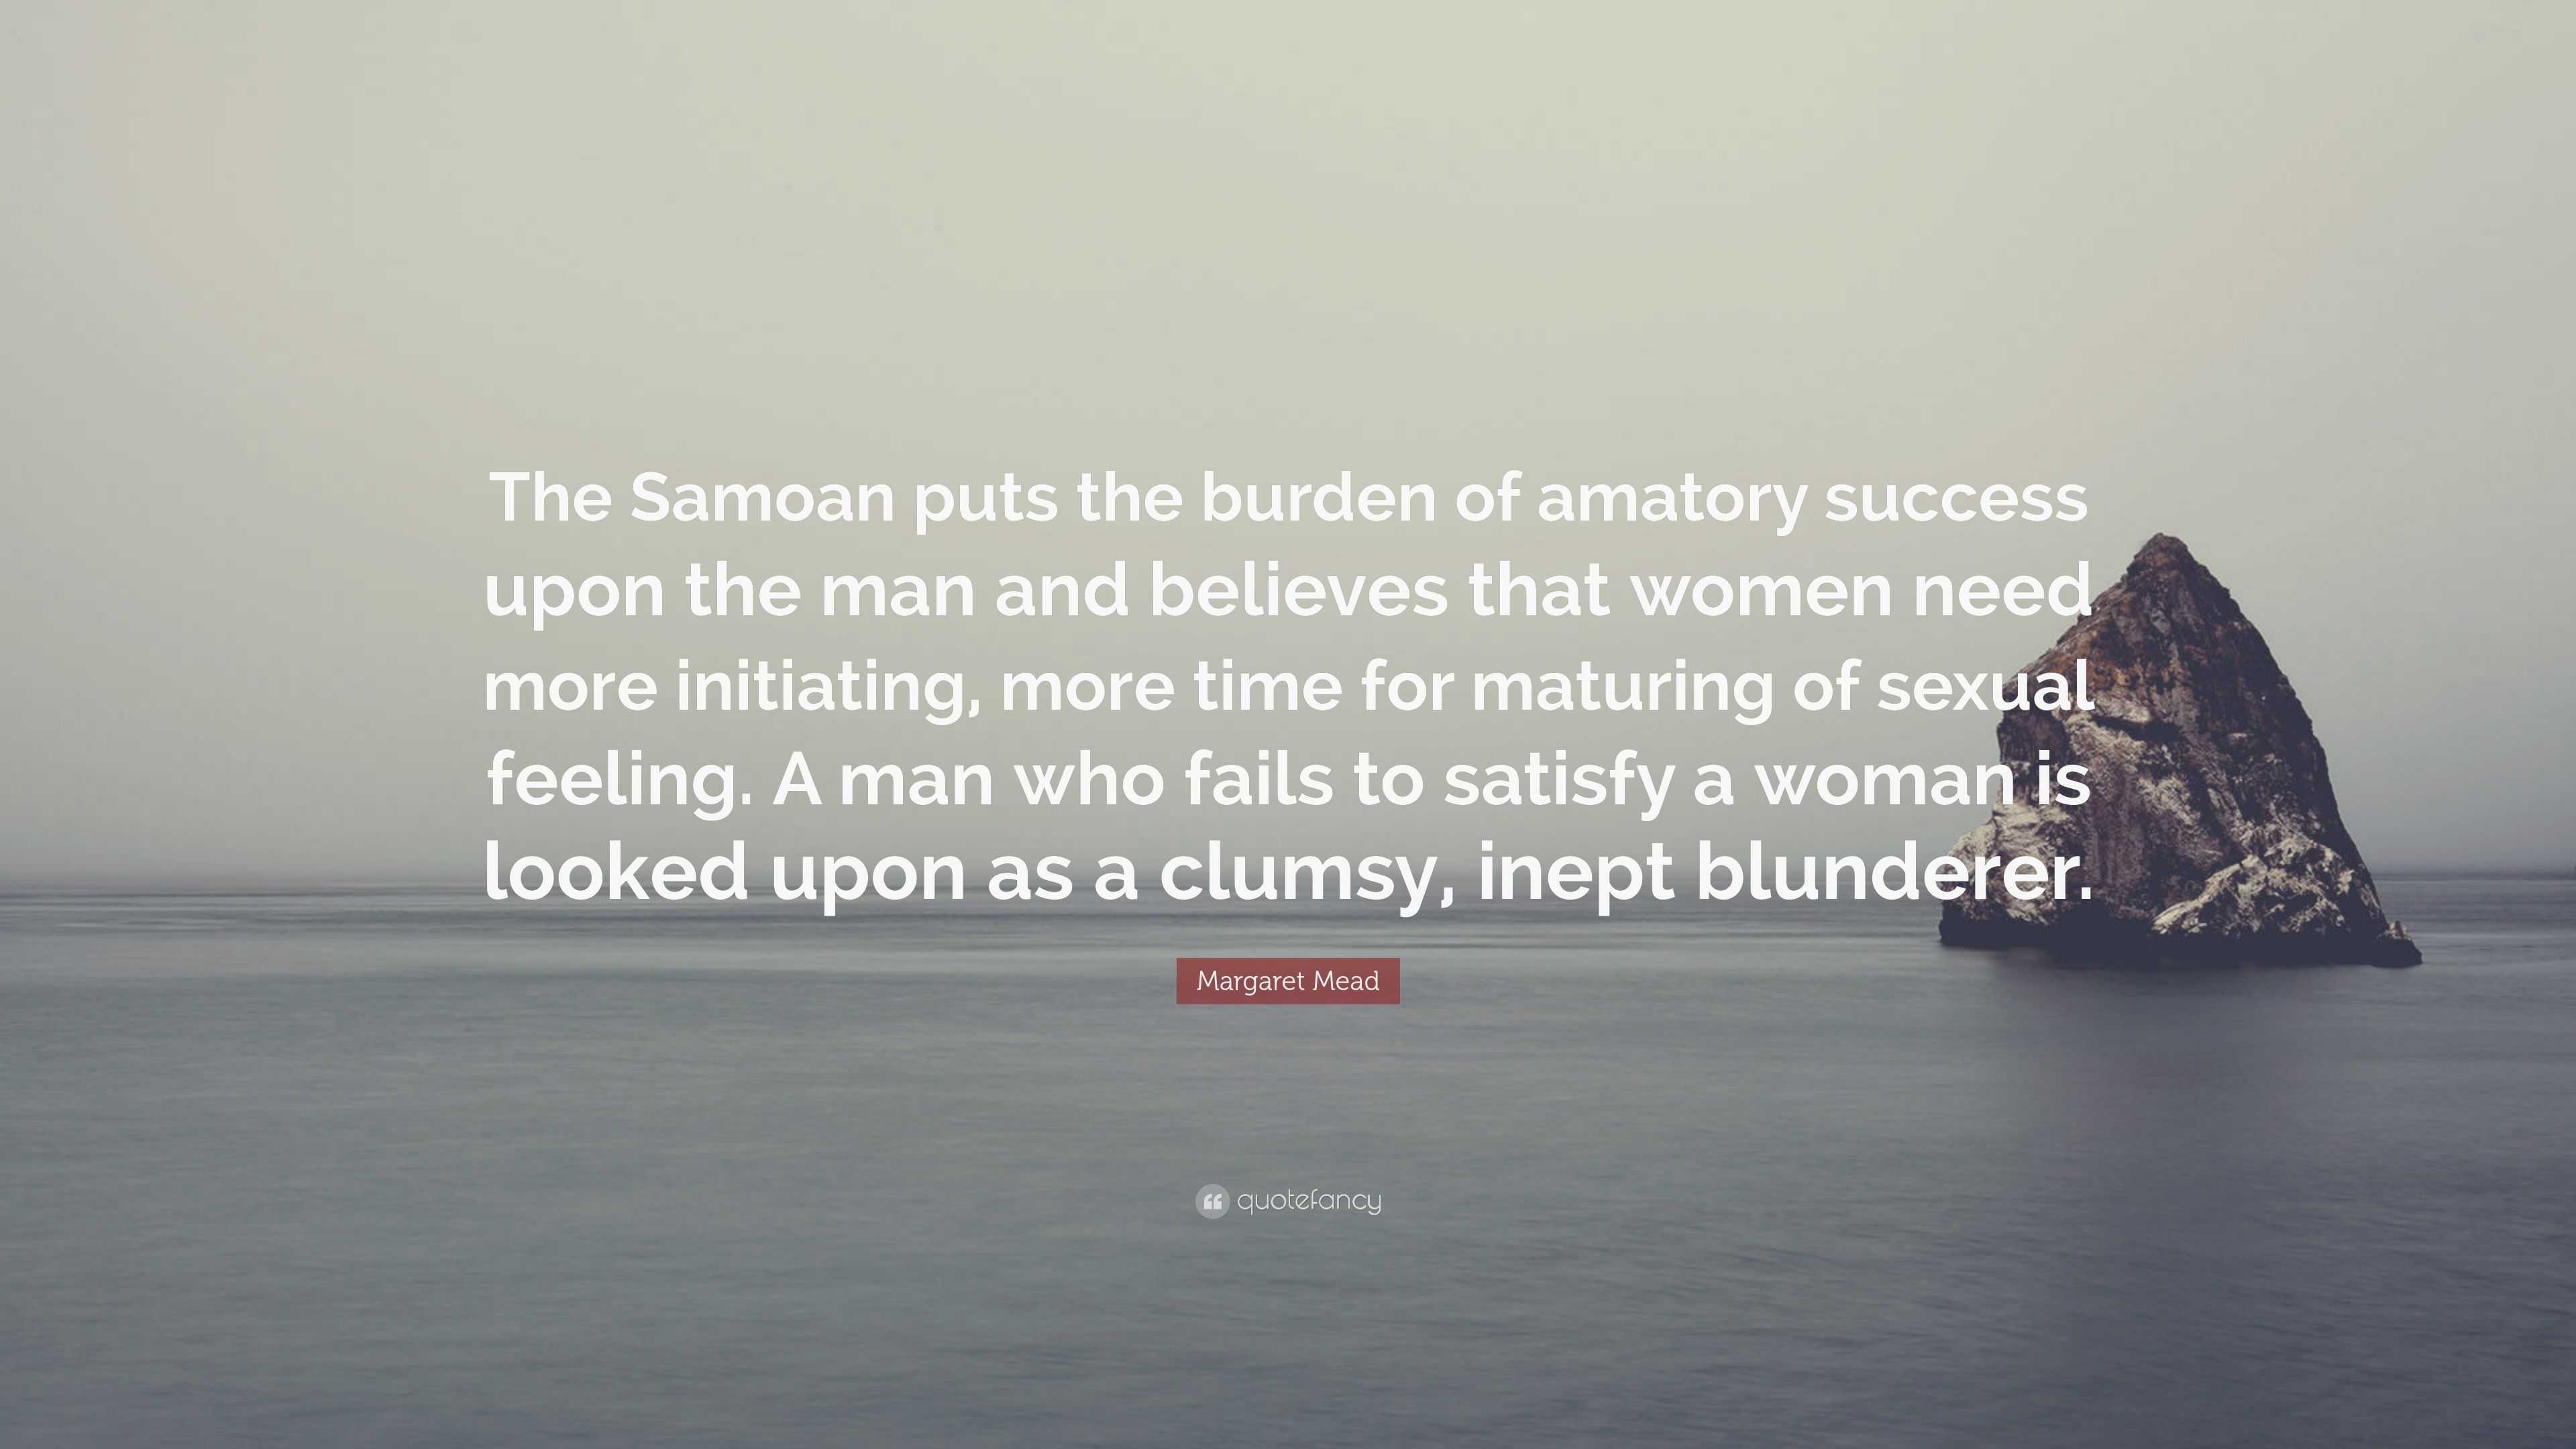 Margaret Mead Quote: “The Samoan puts the burden of amatory success